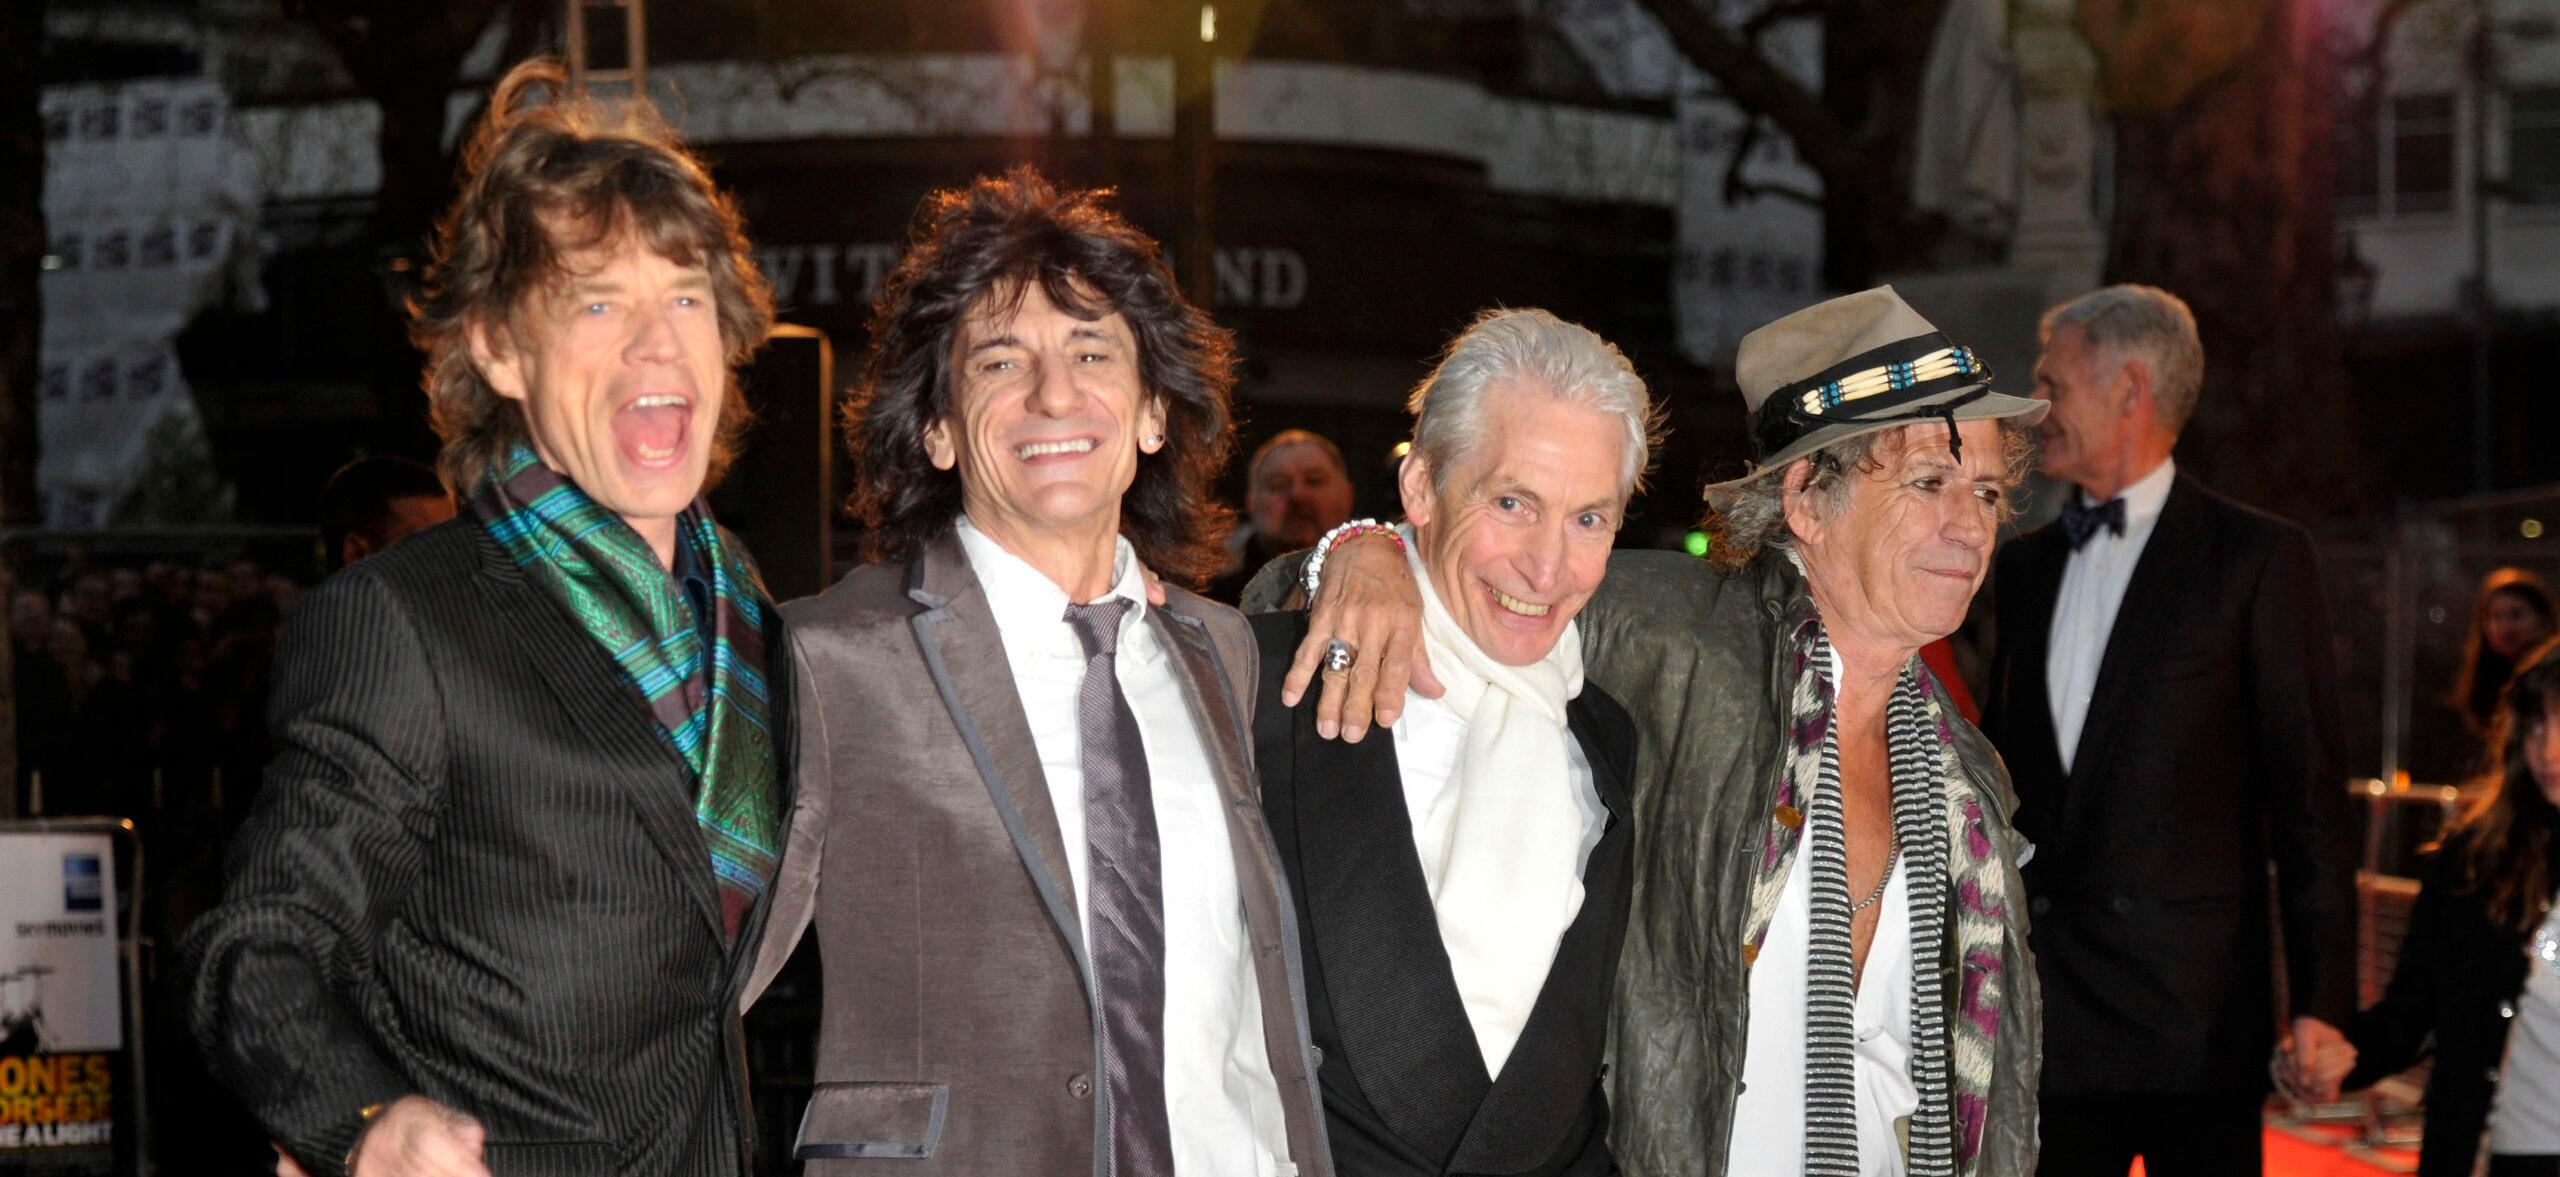 The Remaining Members Of The Rolling Stones Celebrate Charlie Watts’ 82nd Birthday